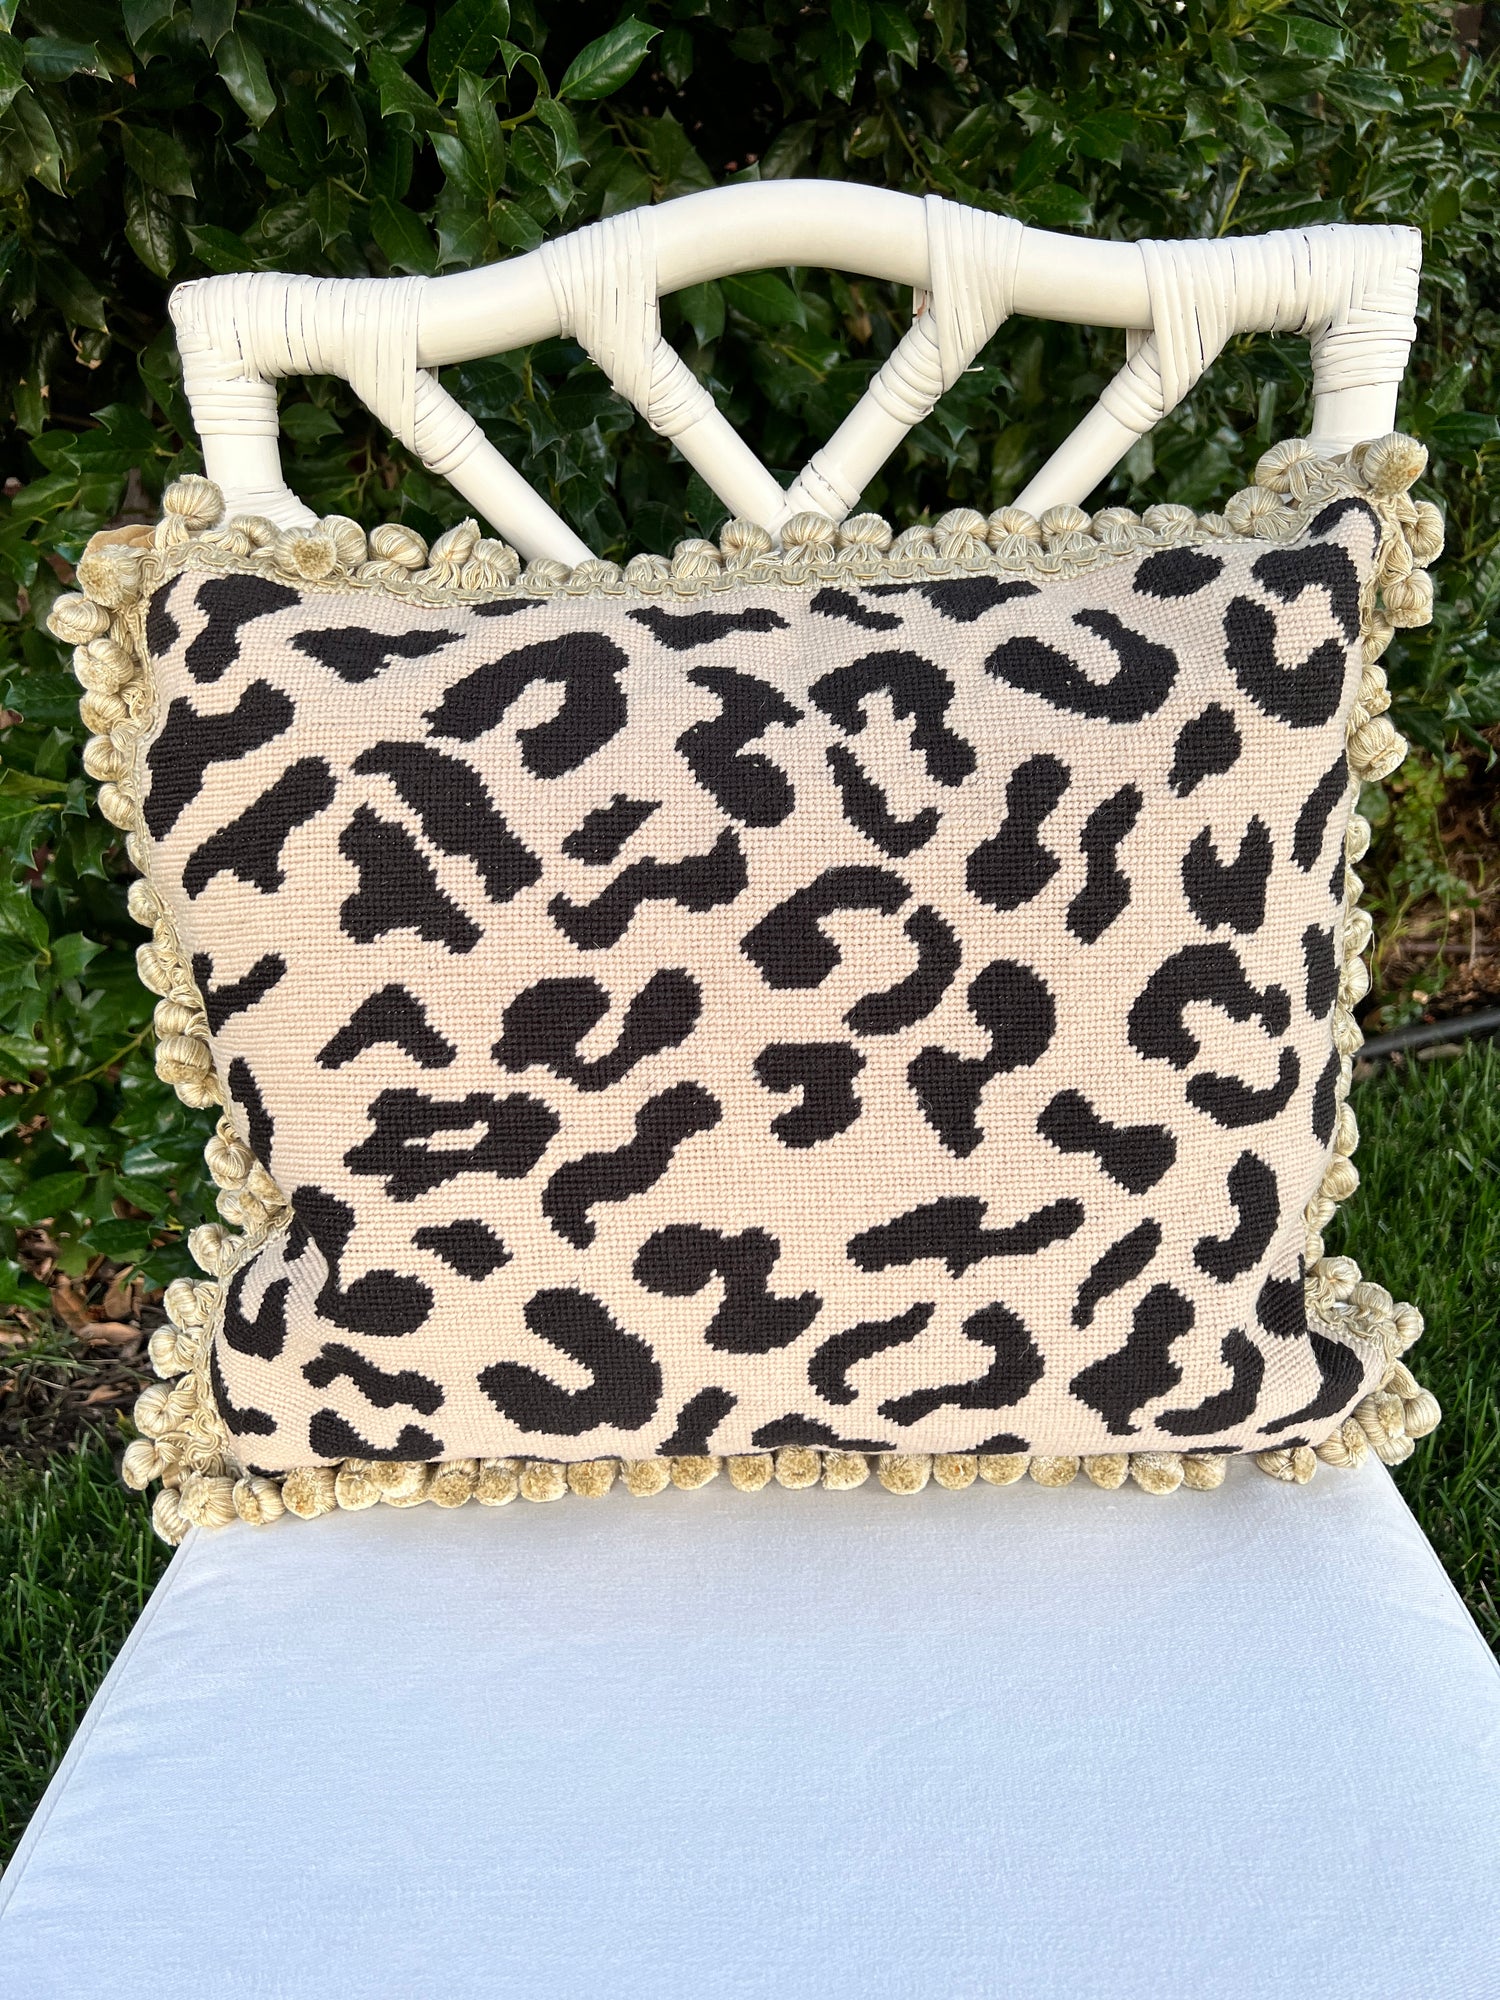 Beige and black leopard needlepoint throw pillow